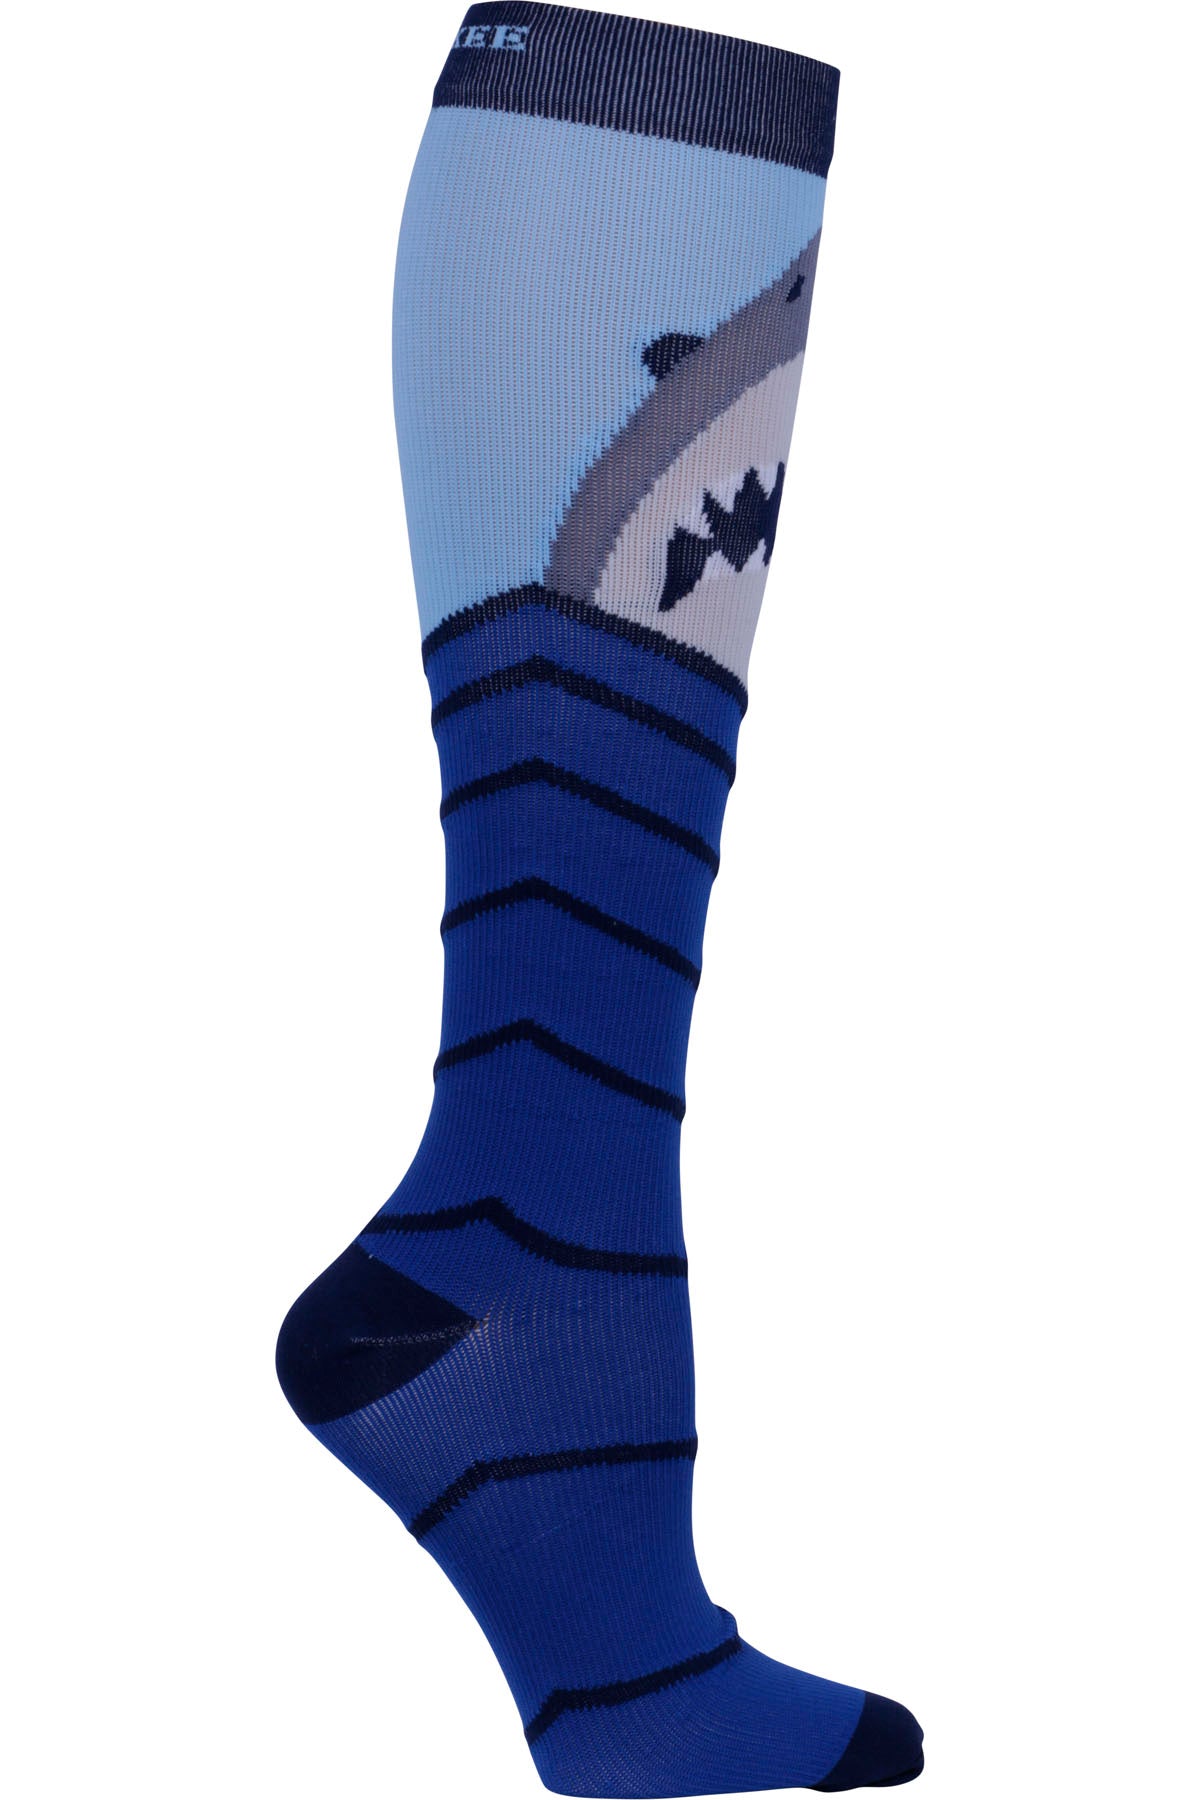 Cherokee Mens Mild Compression Socks 8-12 mmHg in Shark Attack at Parker's Clothing and Shoes.